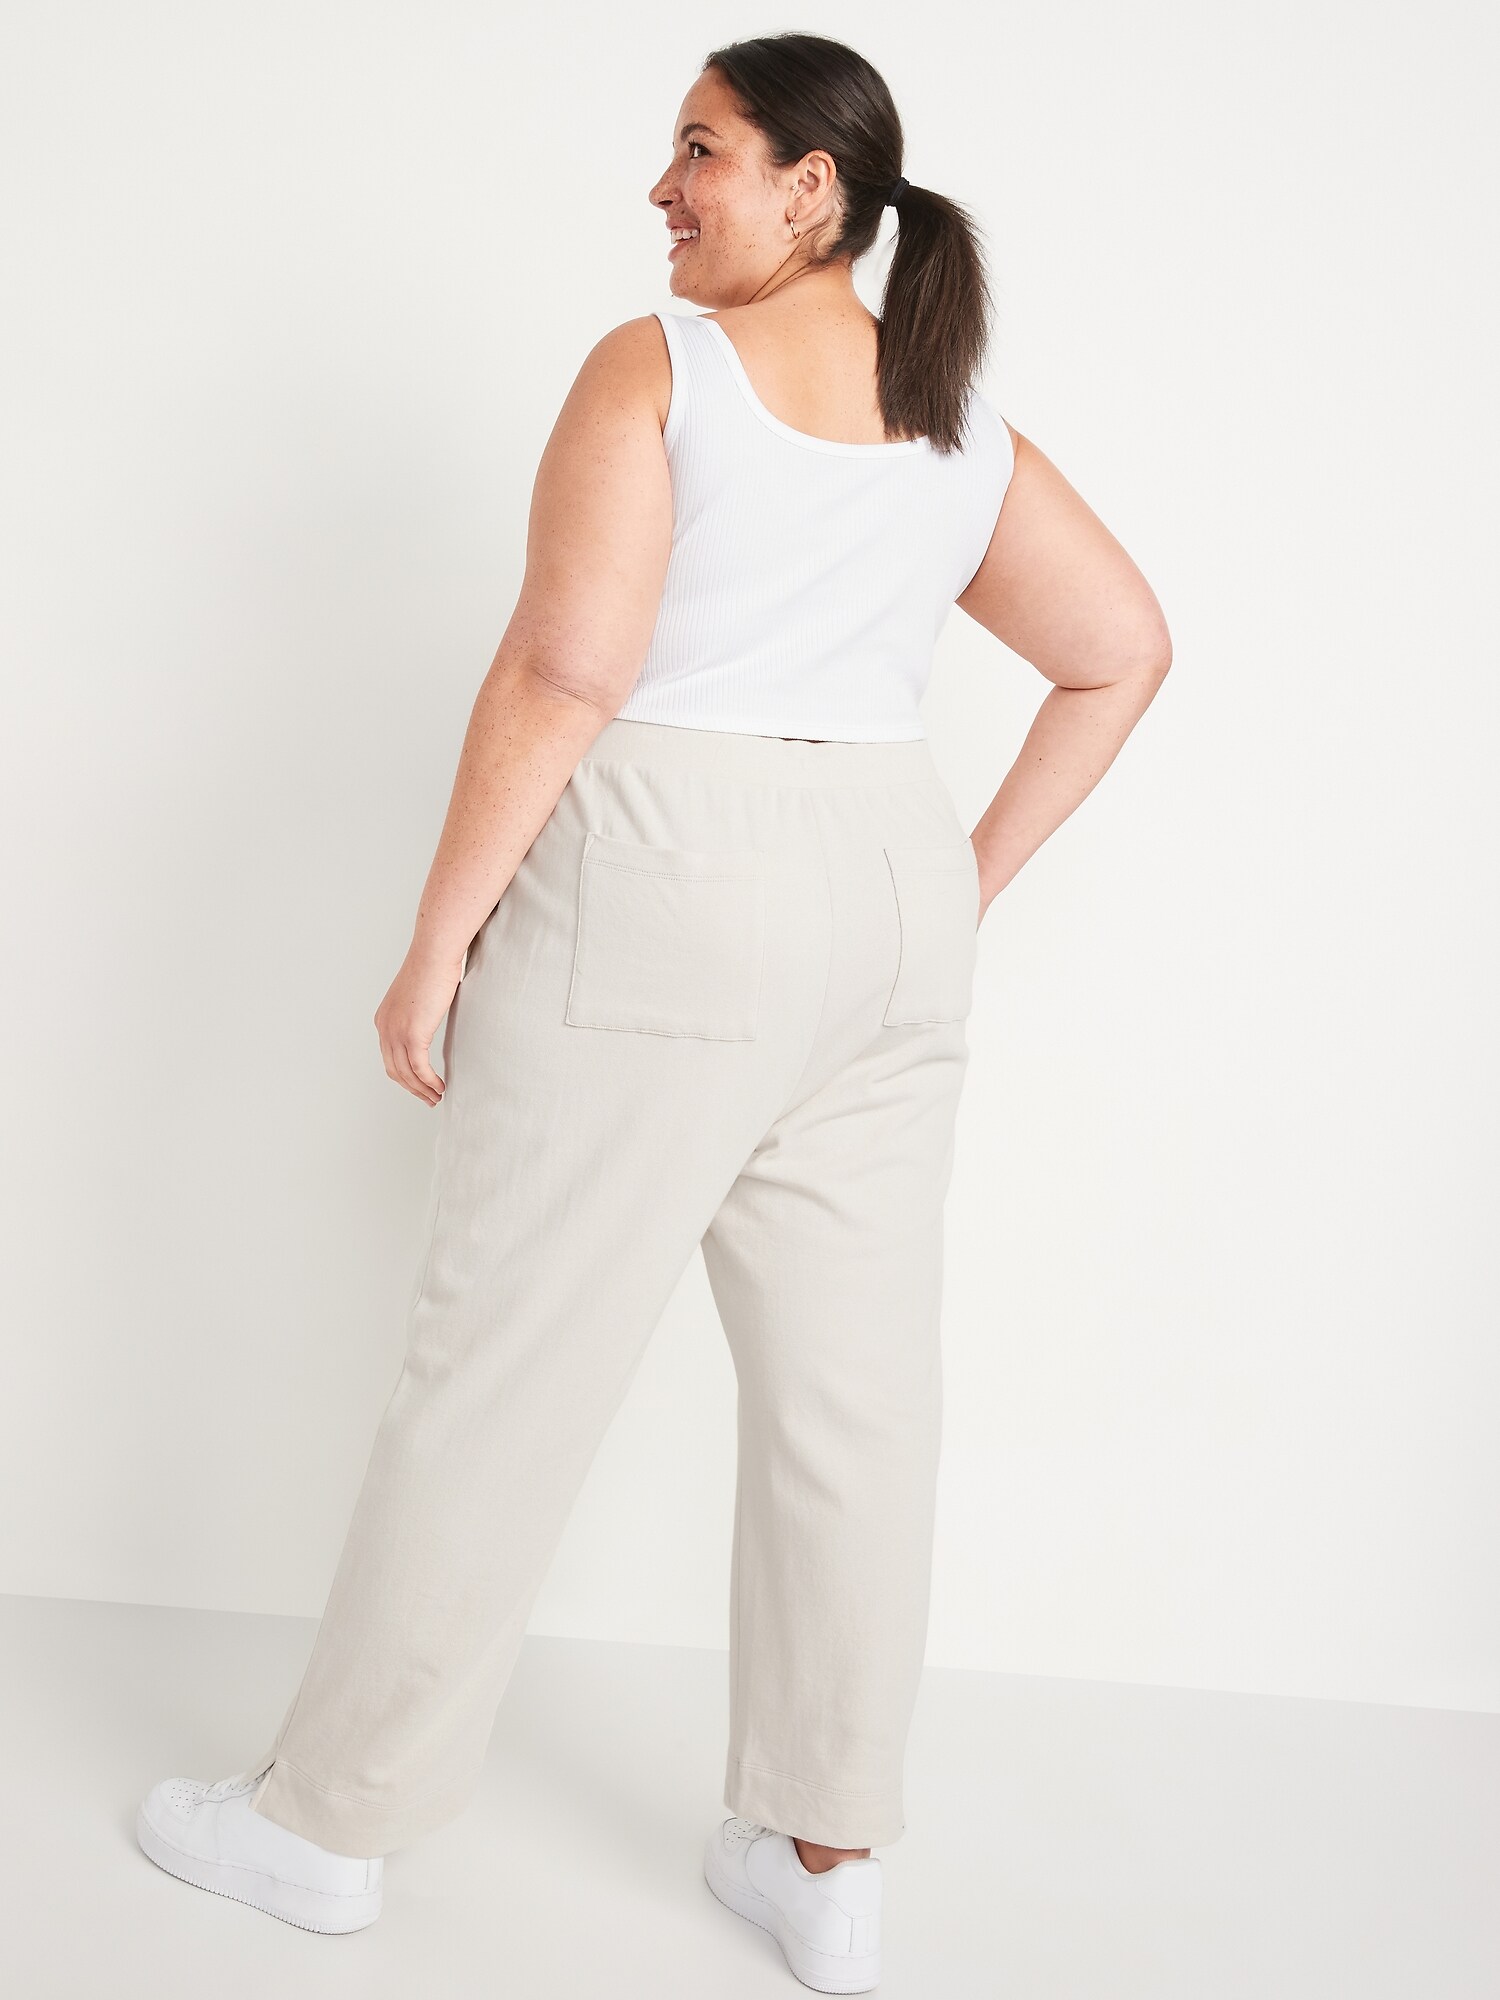 Extra High-Waisted Cropped Sweatpants for Women | Old Navy